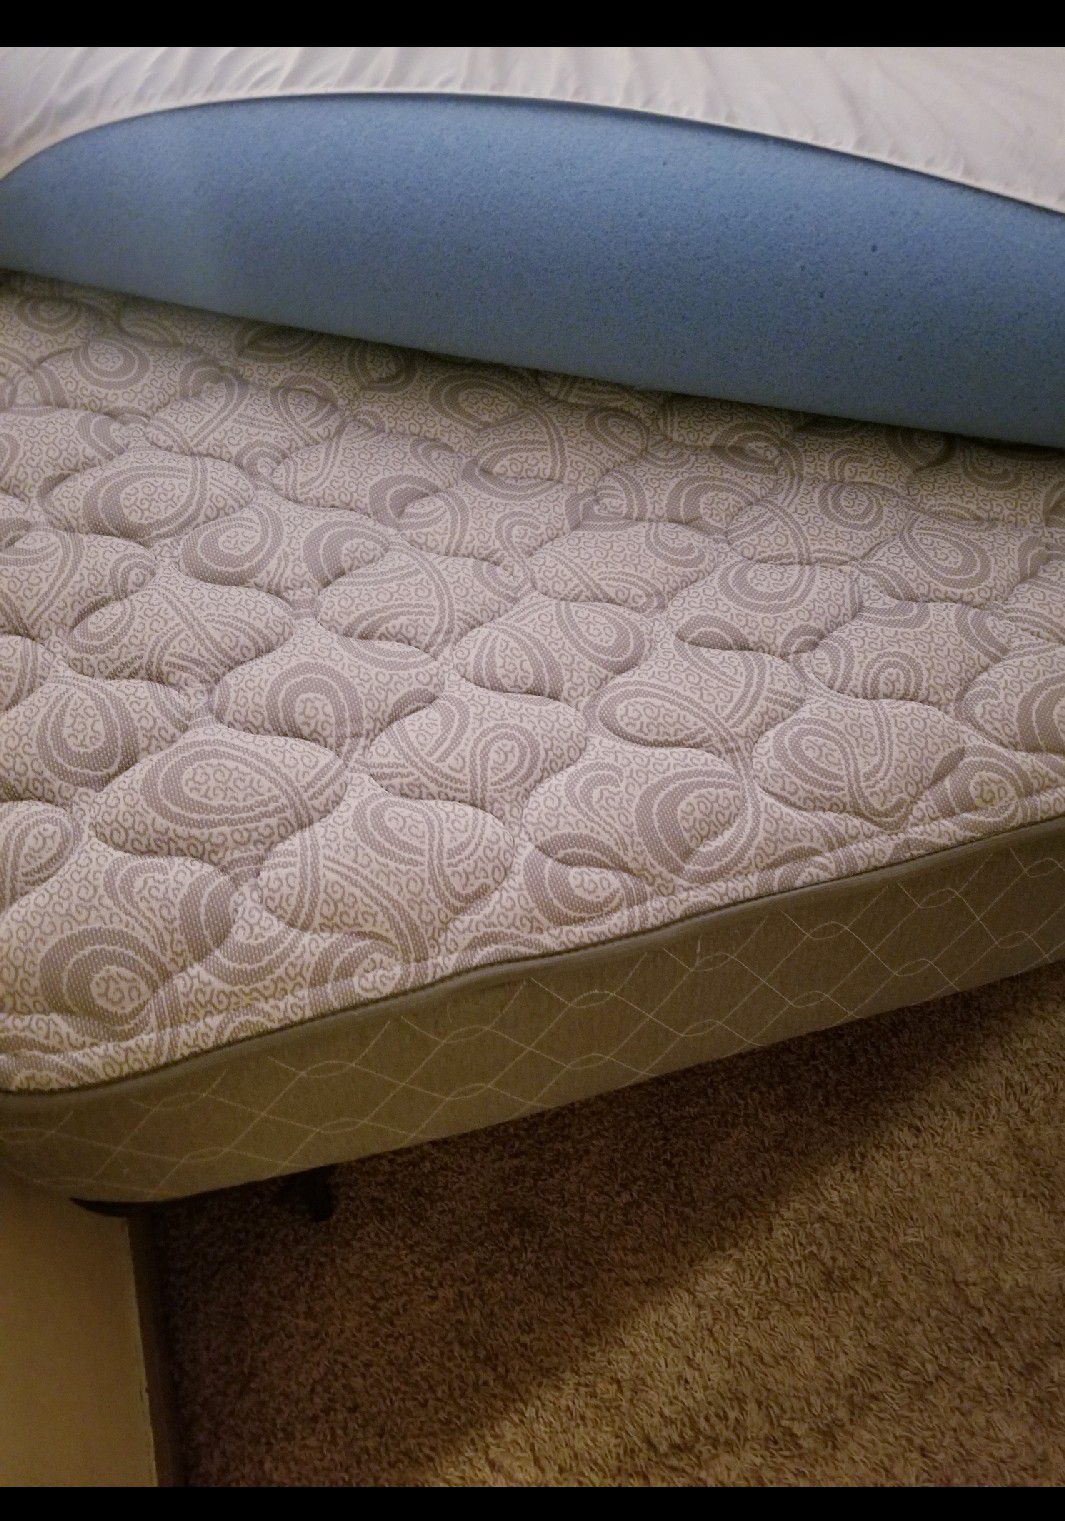 King size matress with frame and topper